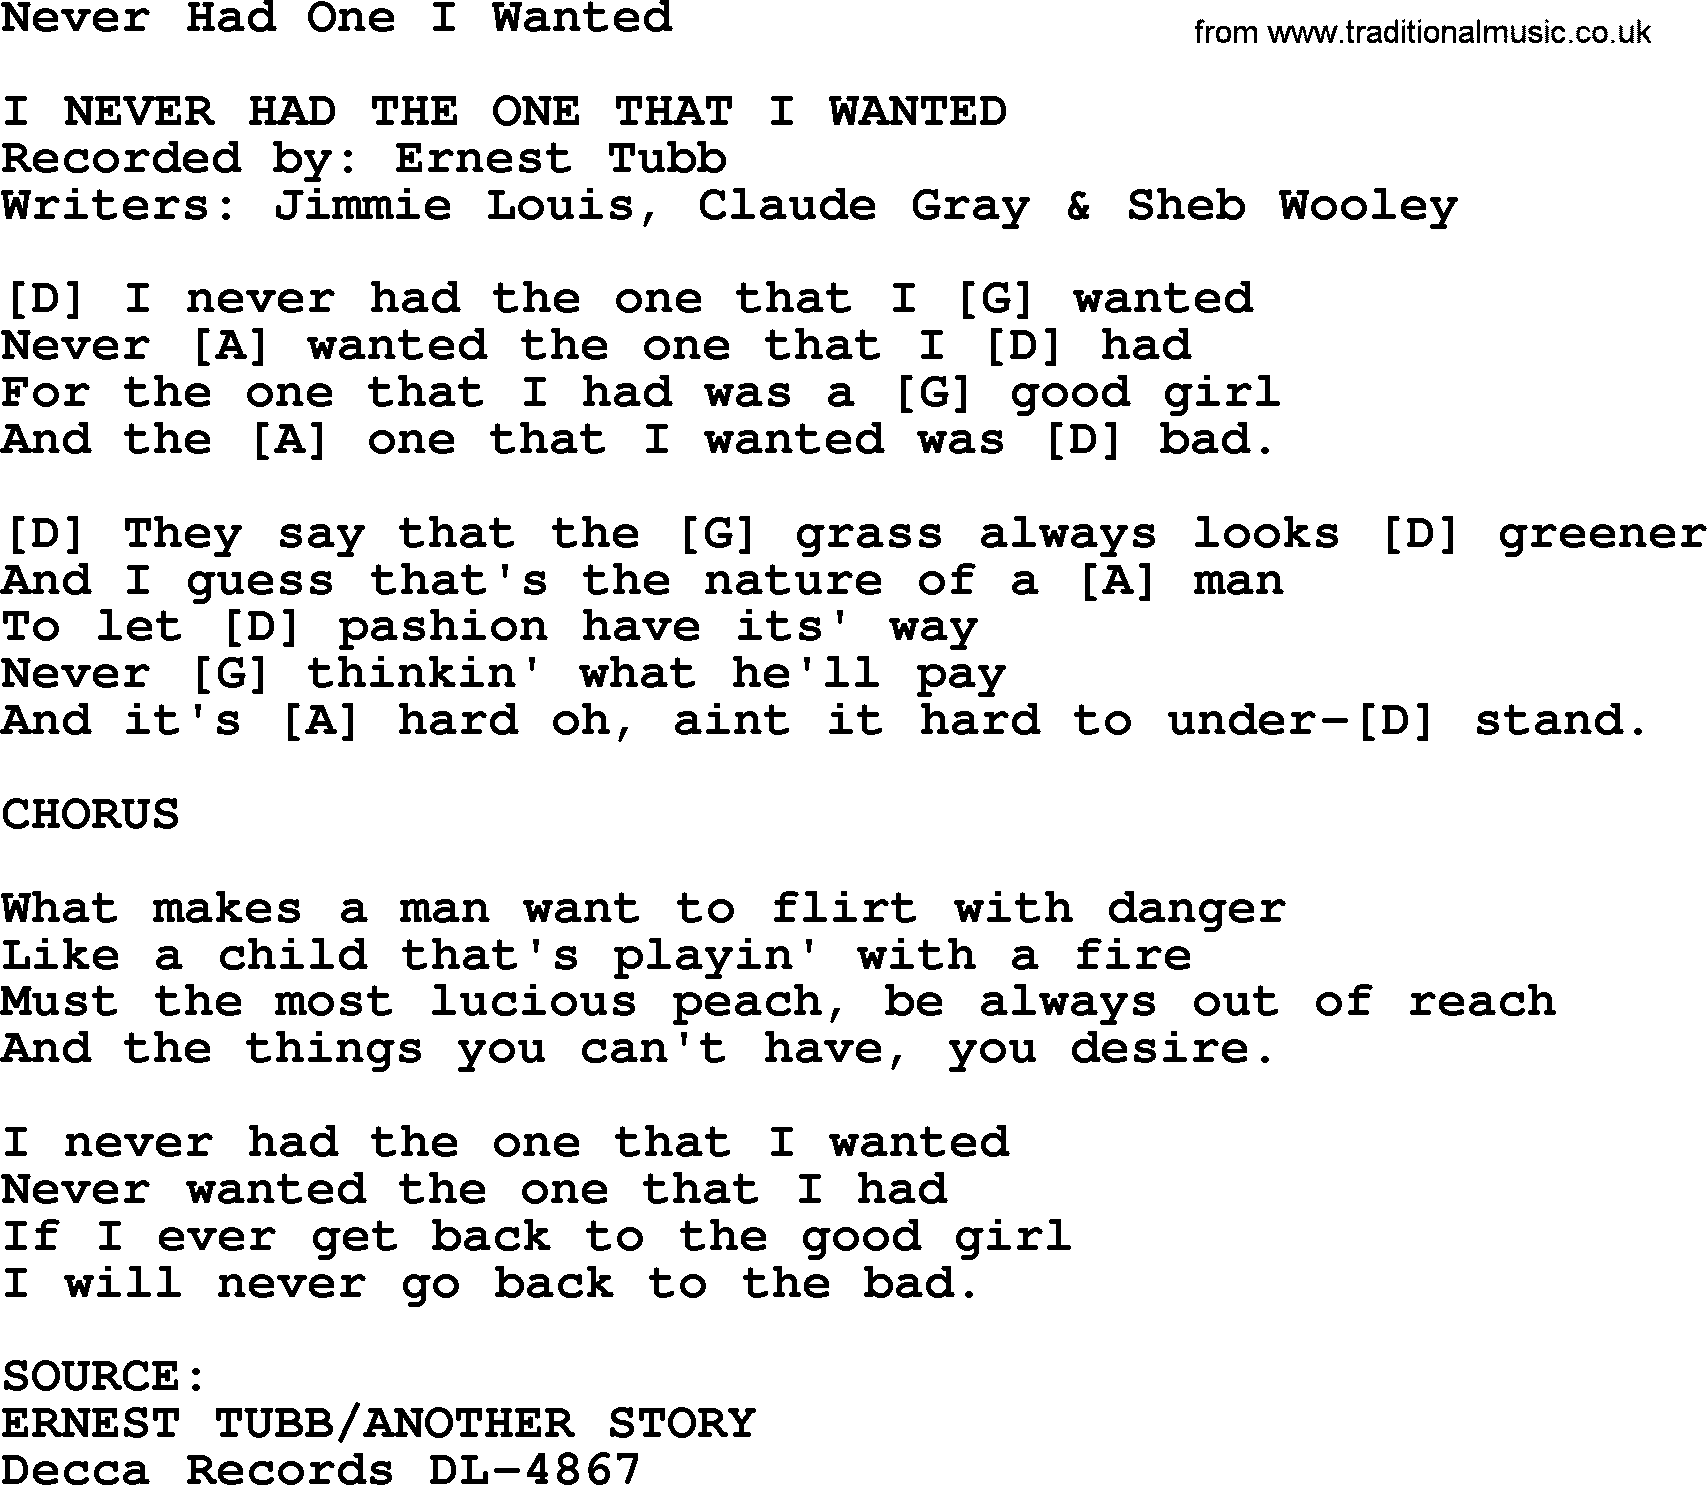 Bluegrass song: Never Had One I Wanted, lyrics and chords